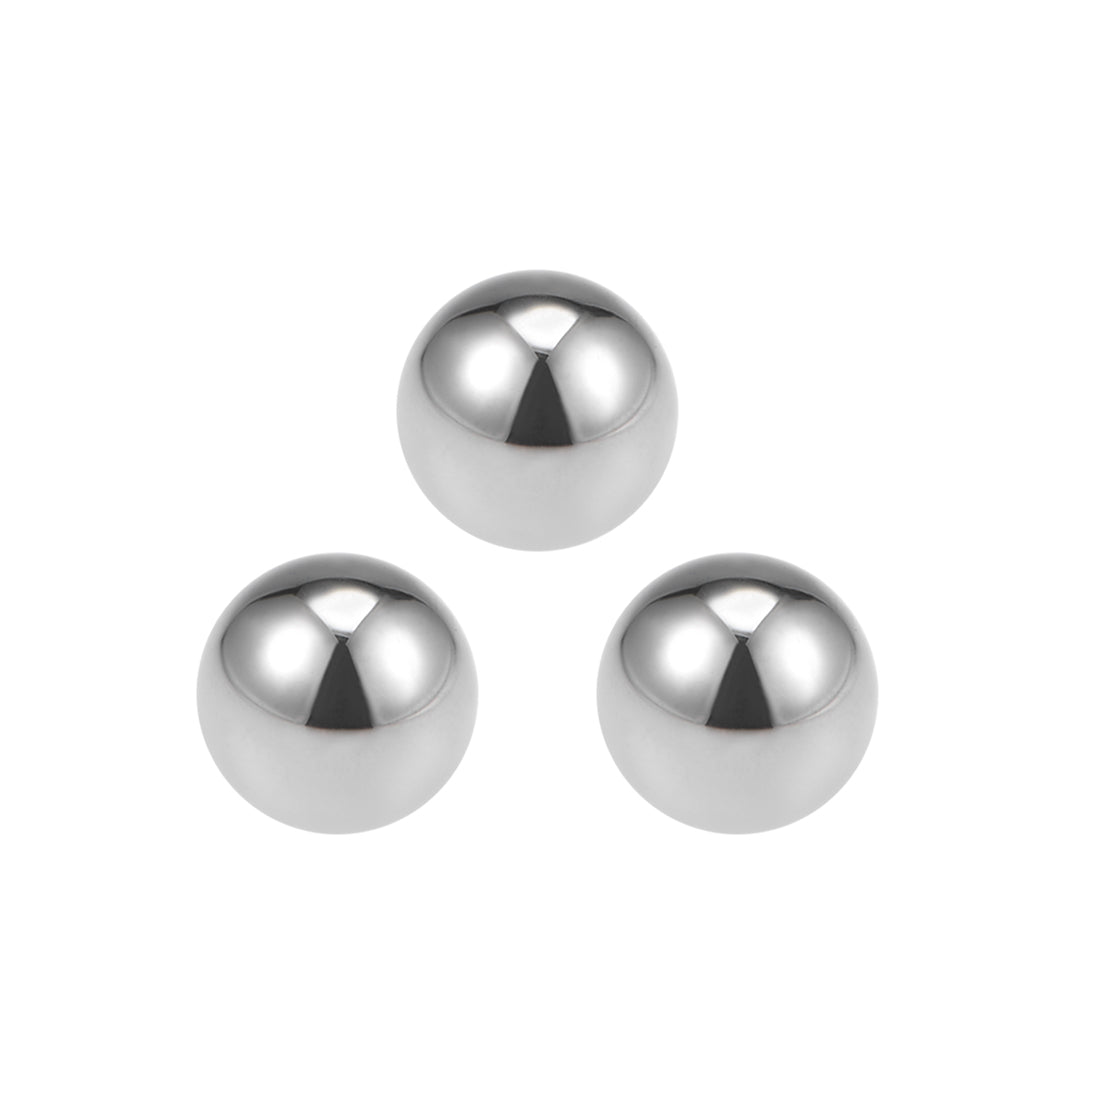 uxcell Uxcell Precision Balls 1" Solid Chrome Steel G25 for Ball Bearing Wheel 3pcs